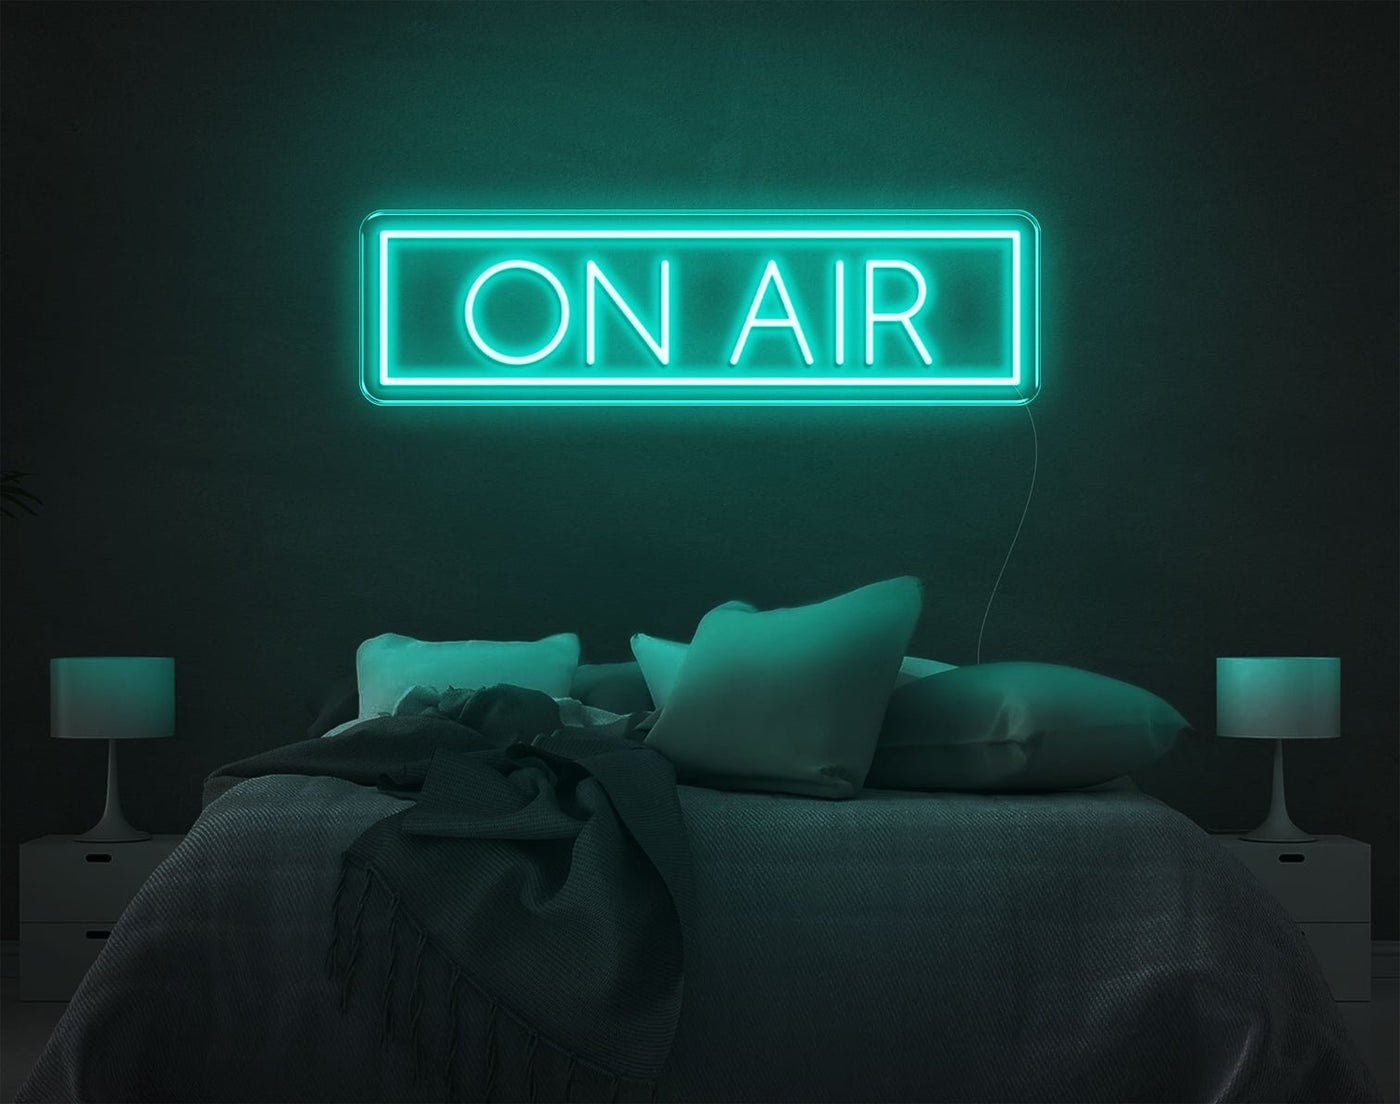 On Air LED Neon Sign - 8inch x 27inchTurquoise